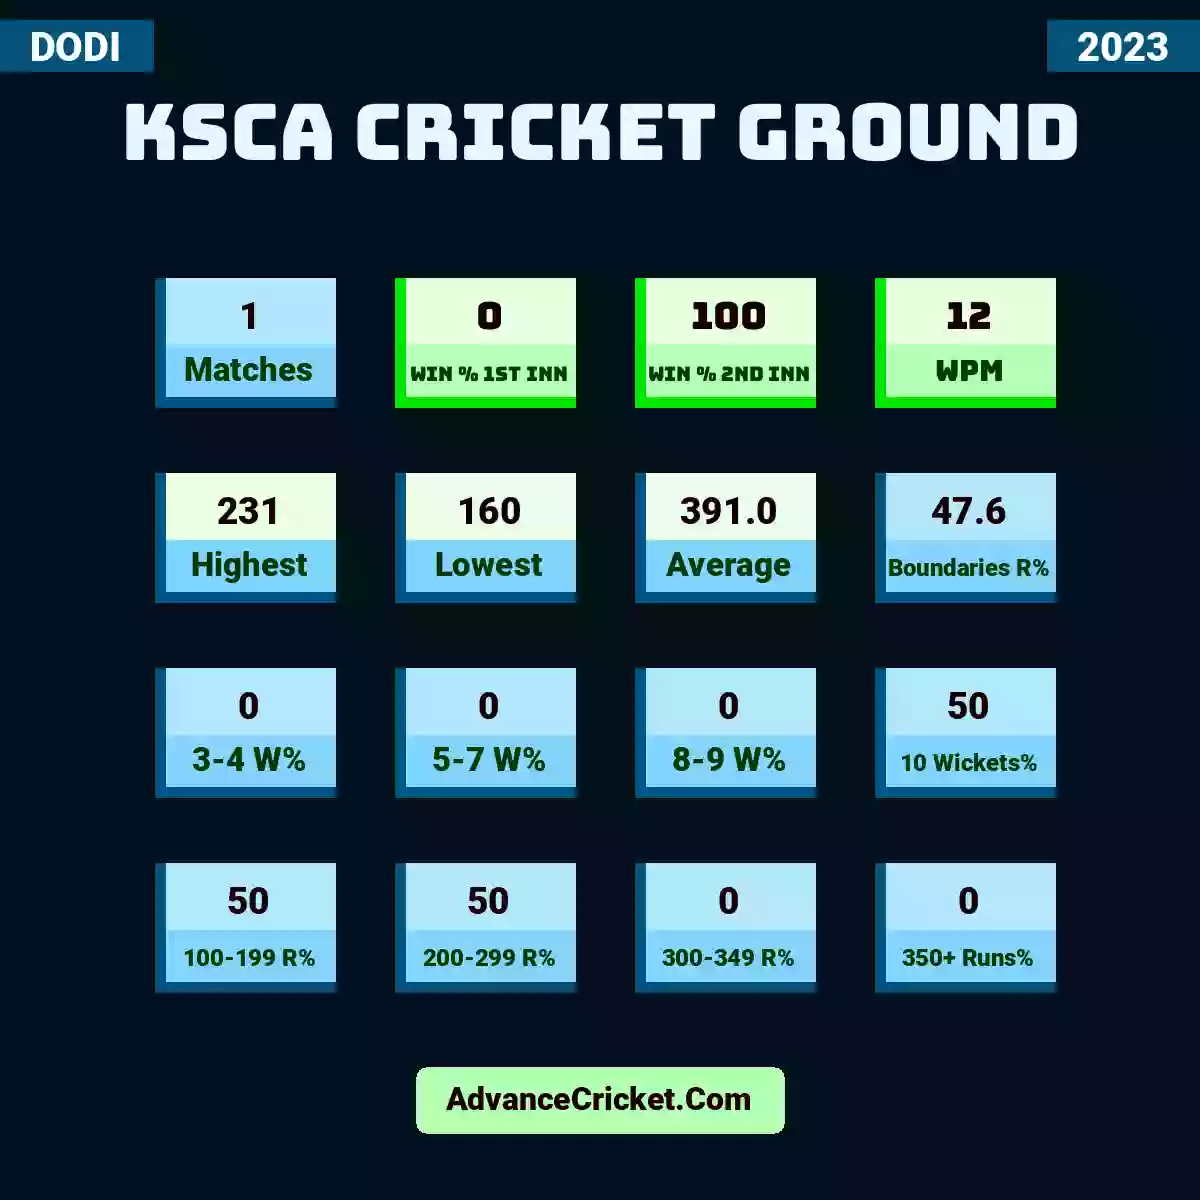 Image showing KSCA Cricket Ground with Matches: 1, Win % 1st Inn: 0, Win % 2nd Inn: 100, WPM: 12, Highest: 231, Lowest: 160, Average: 391.0, Boundaries R%: 47.6, 3-4 W%: 0, 5-7 W%: 0, 8-9 W%: 0, 10 Wickets%: 50, 100-199 R%: 50, 200-299 R%: 50, 300-349 R%: 0, 350+ Runs%: 0.